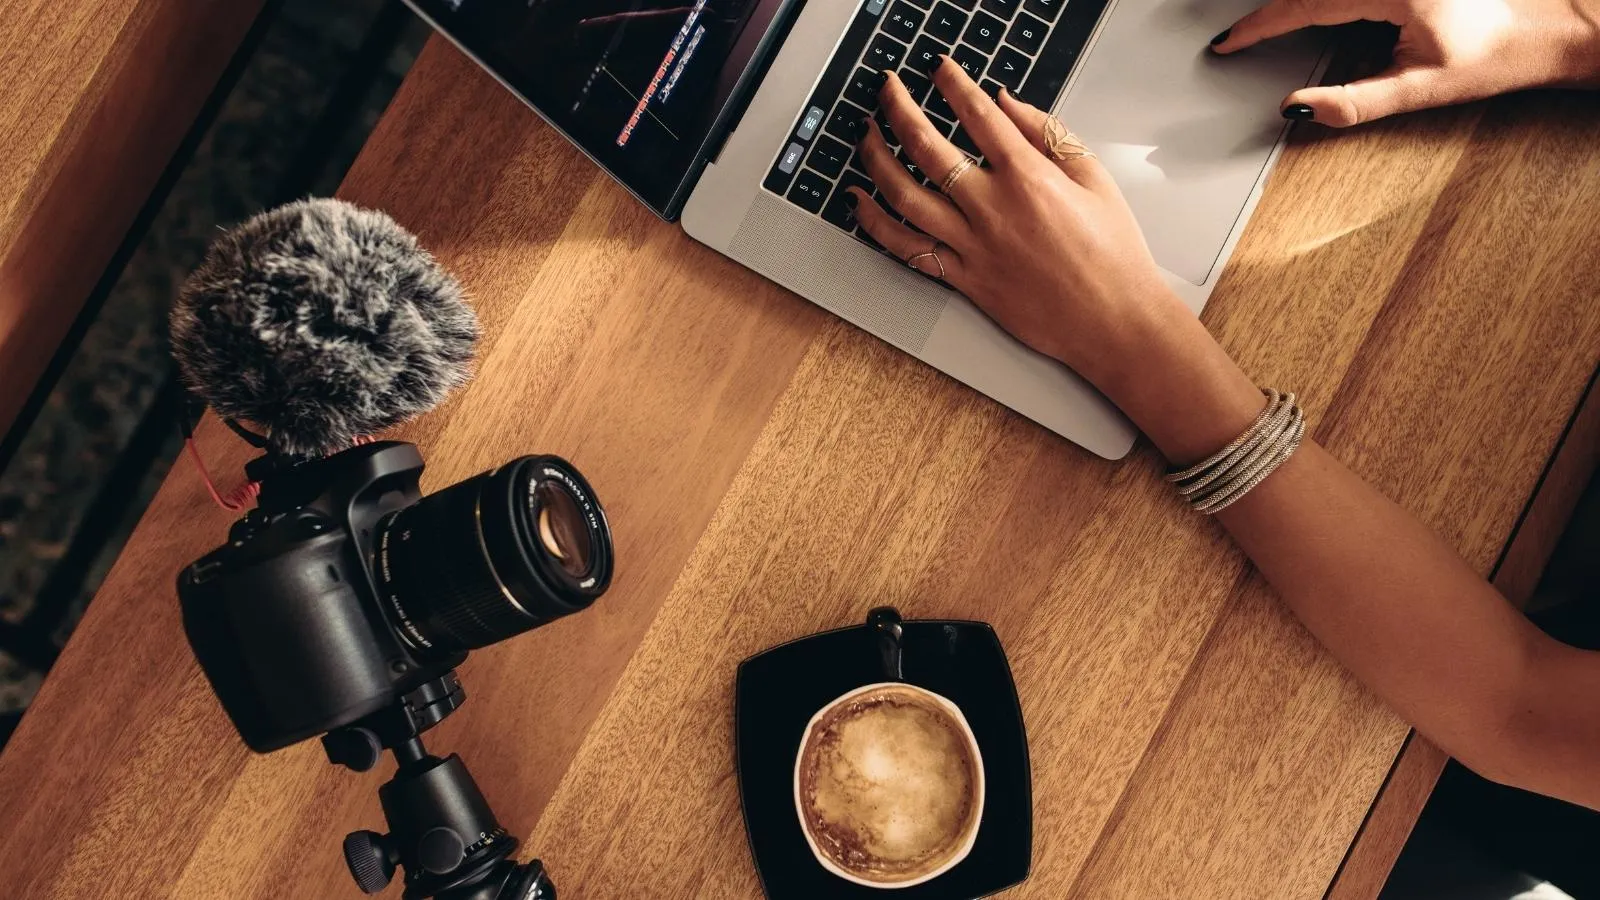 vlog editing to increase your vlog's production